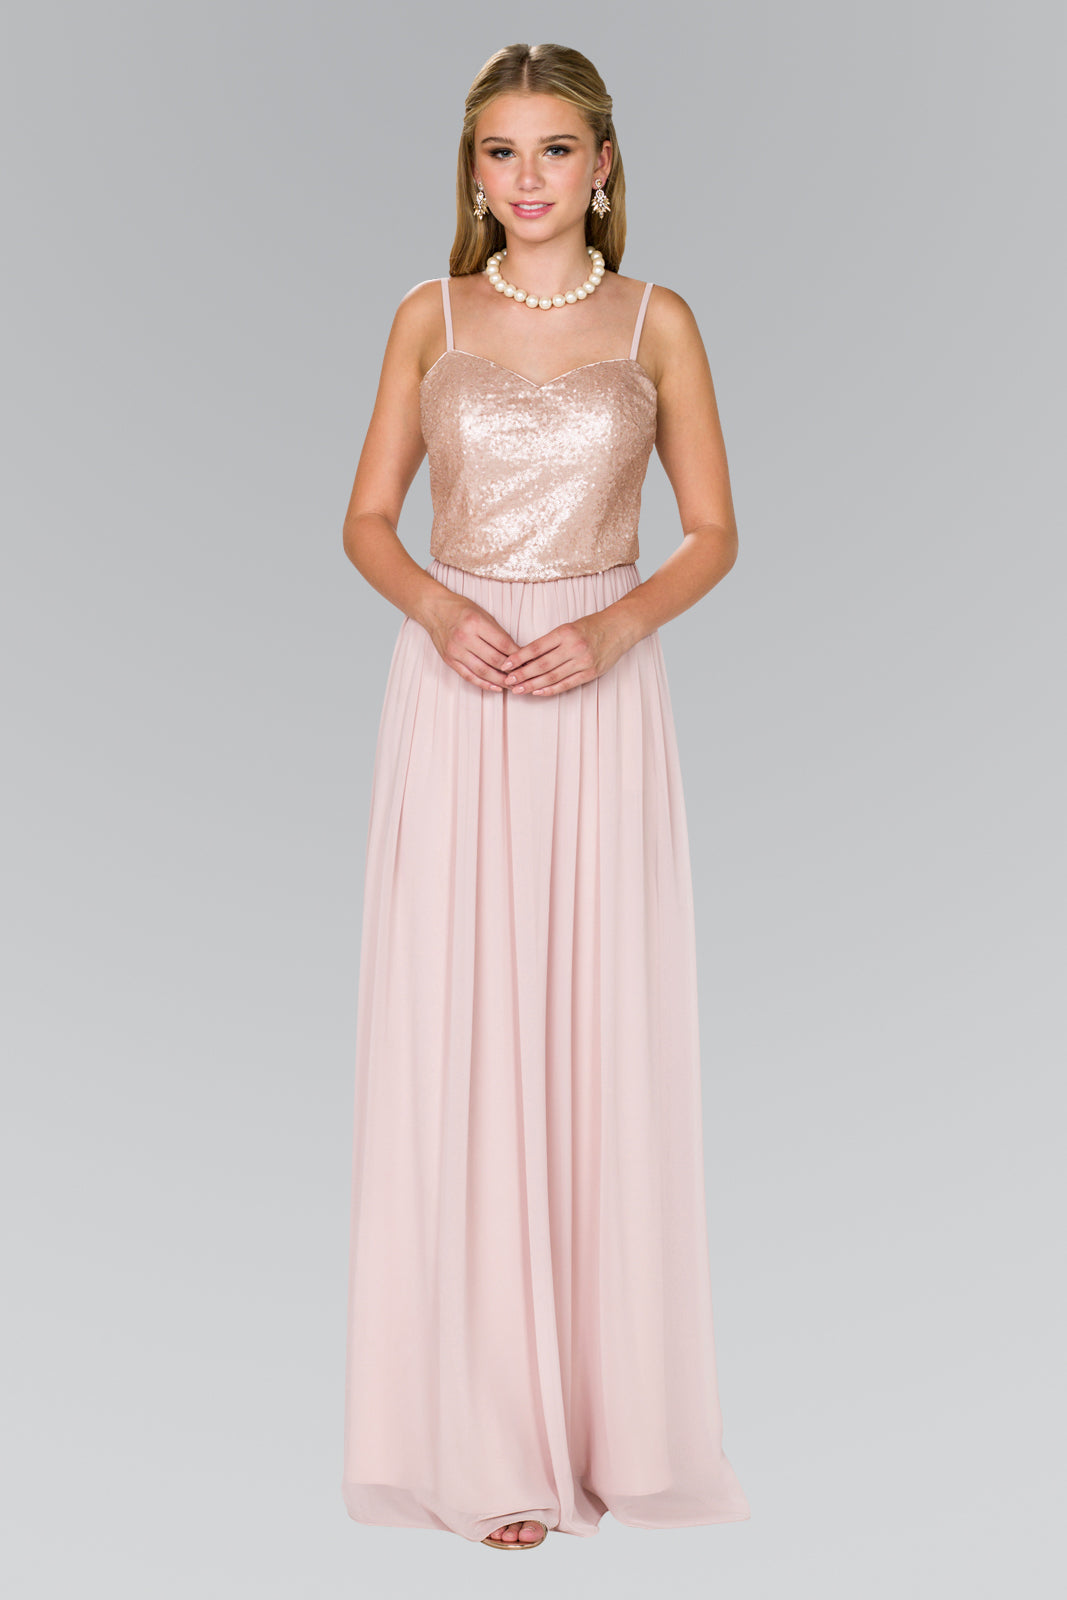 GLS COLLECTIVE - GL2416 - Champagne Size M-3XL or Navy XL Long Prom or Bridesmaid Dress